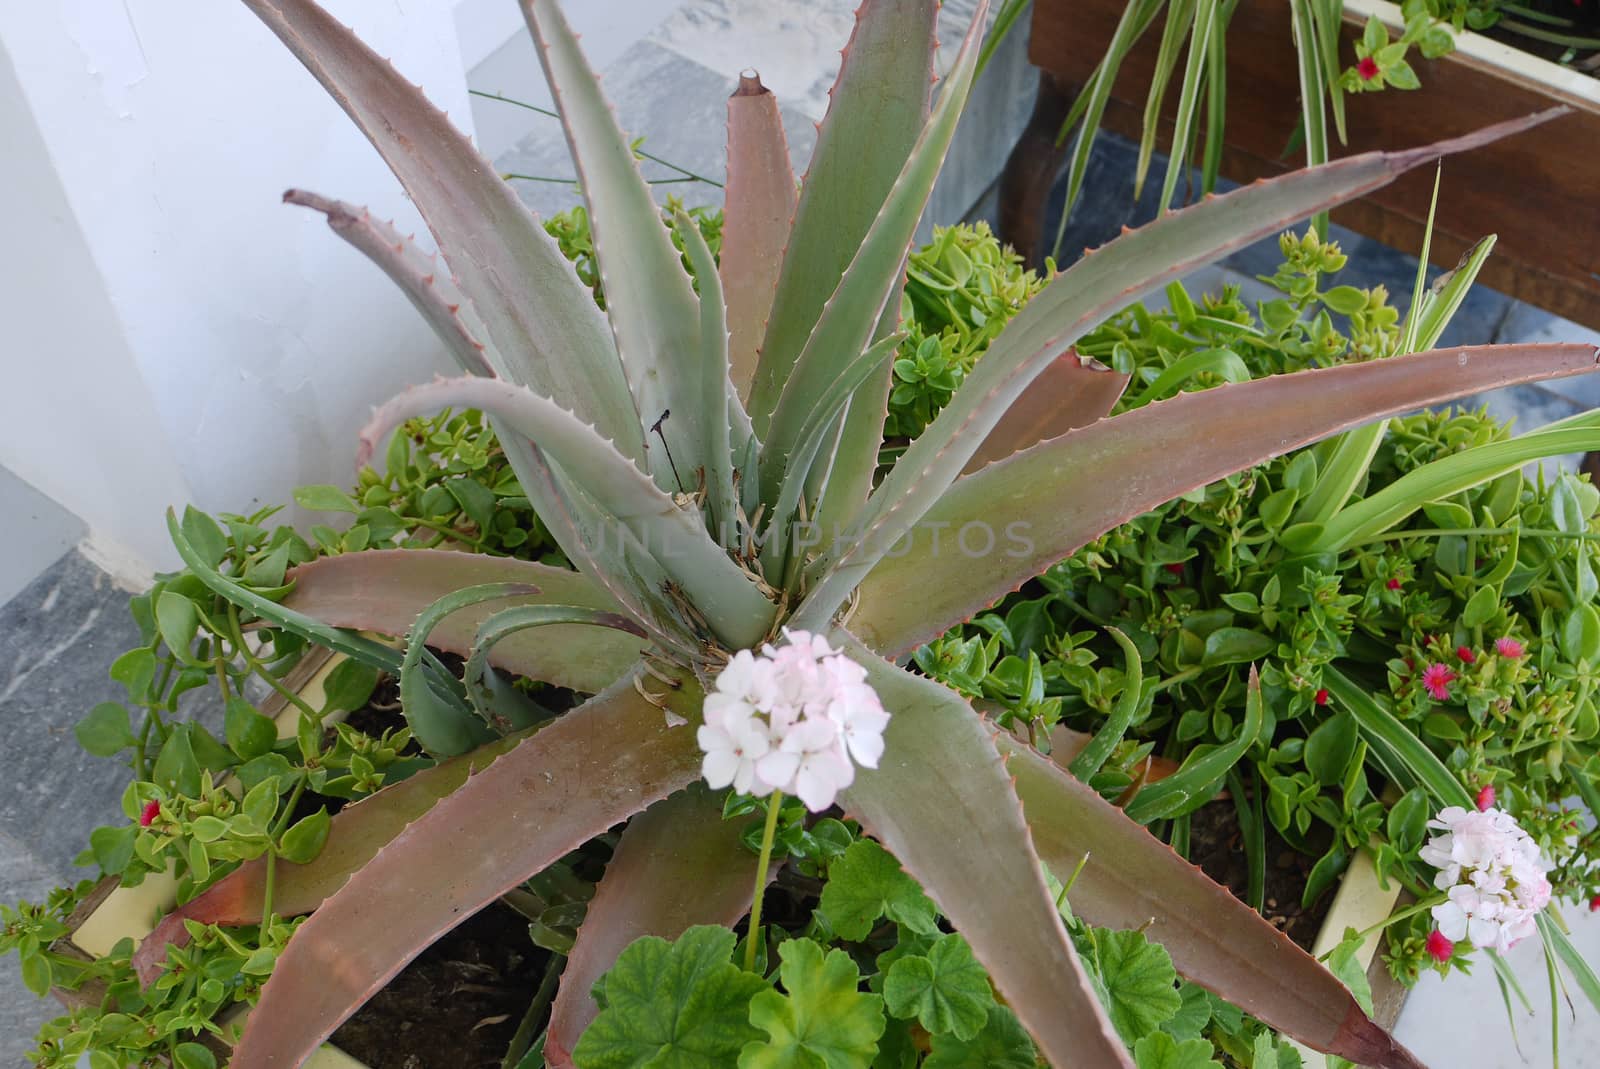 A spiny, large aloe flower is surrounded by small white and pink flowers